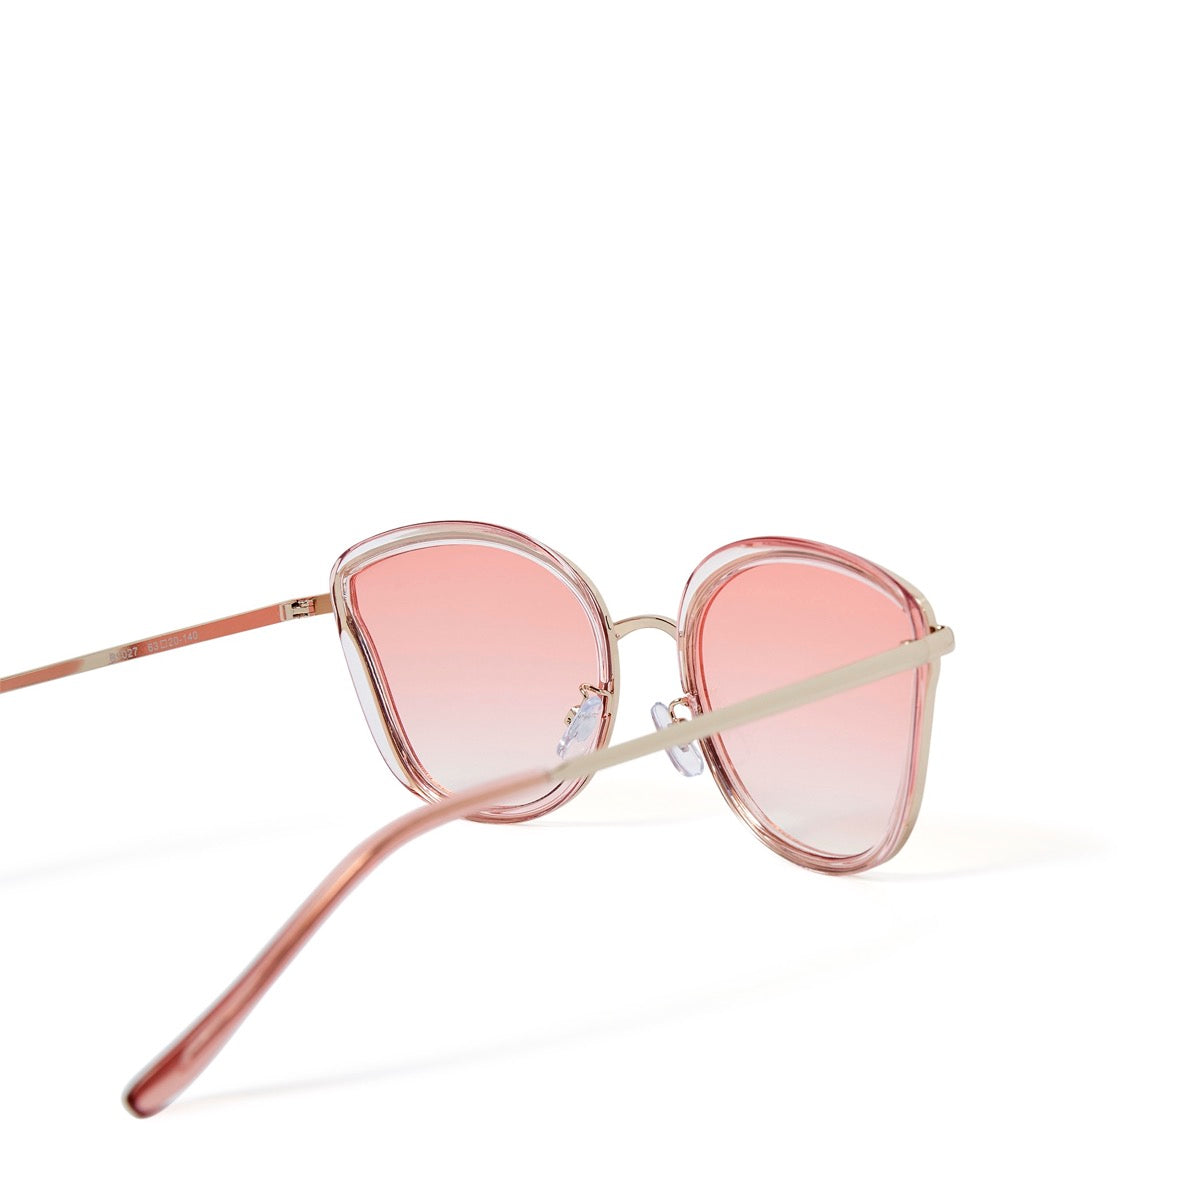 Cat eye glasses with pink lenses